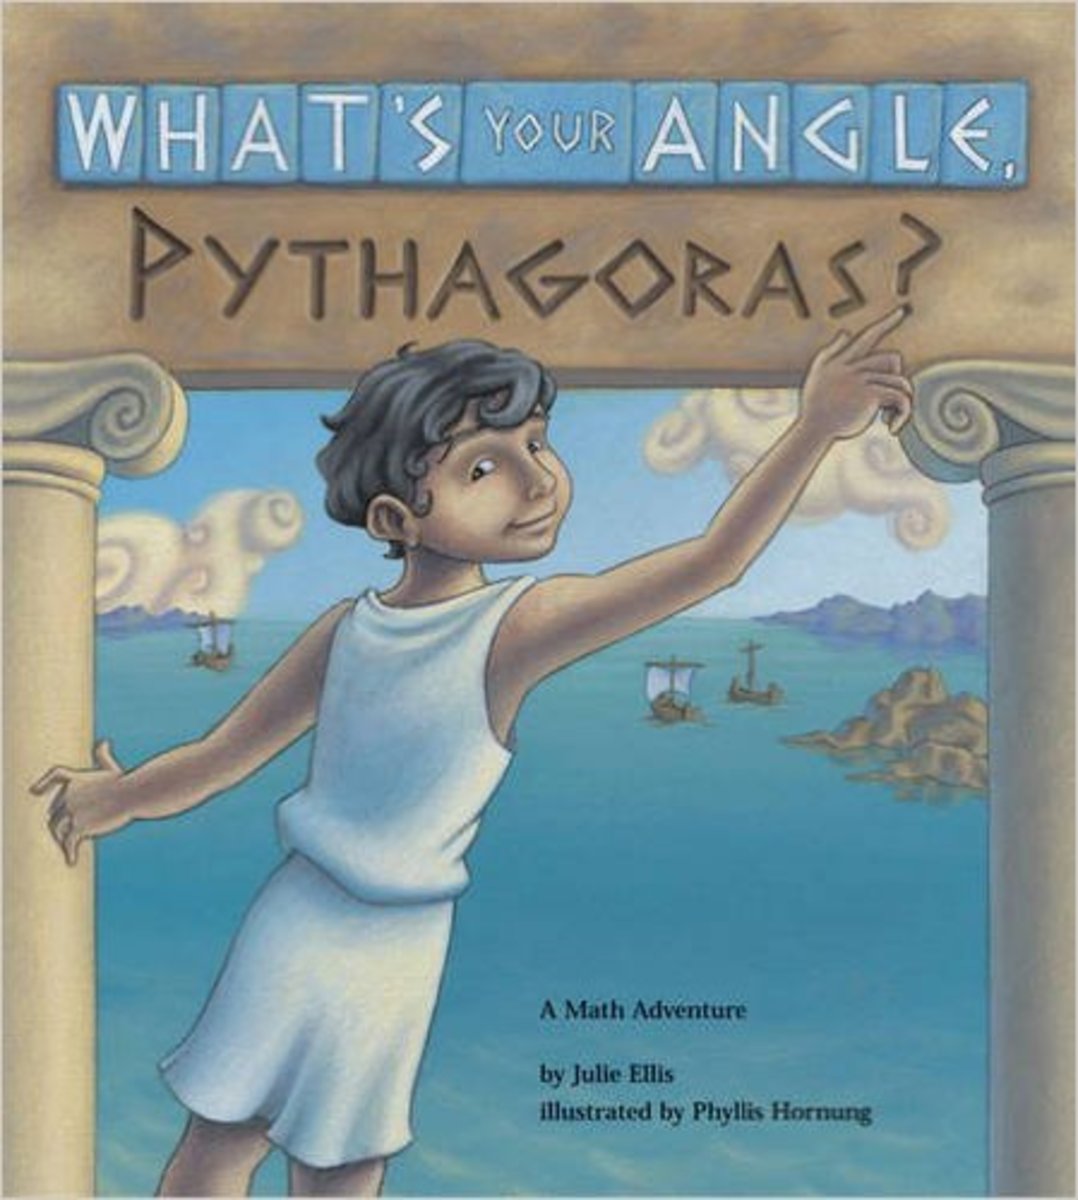 What's Your Angle, Pythagoras? by Julie Ellis  - Image credit: amazon.com